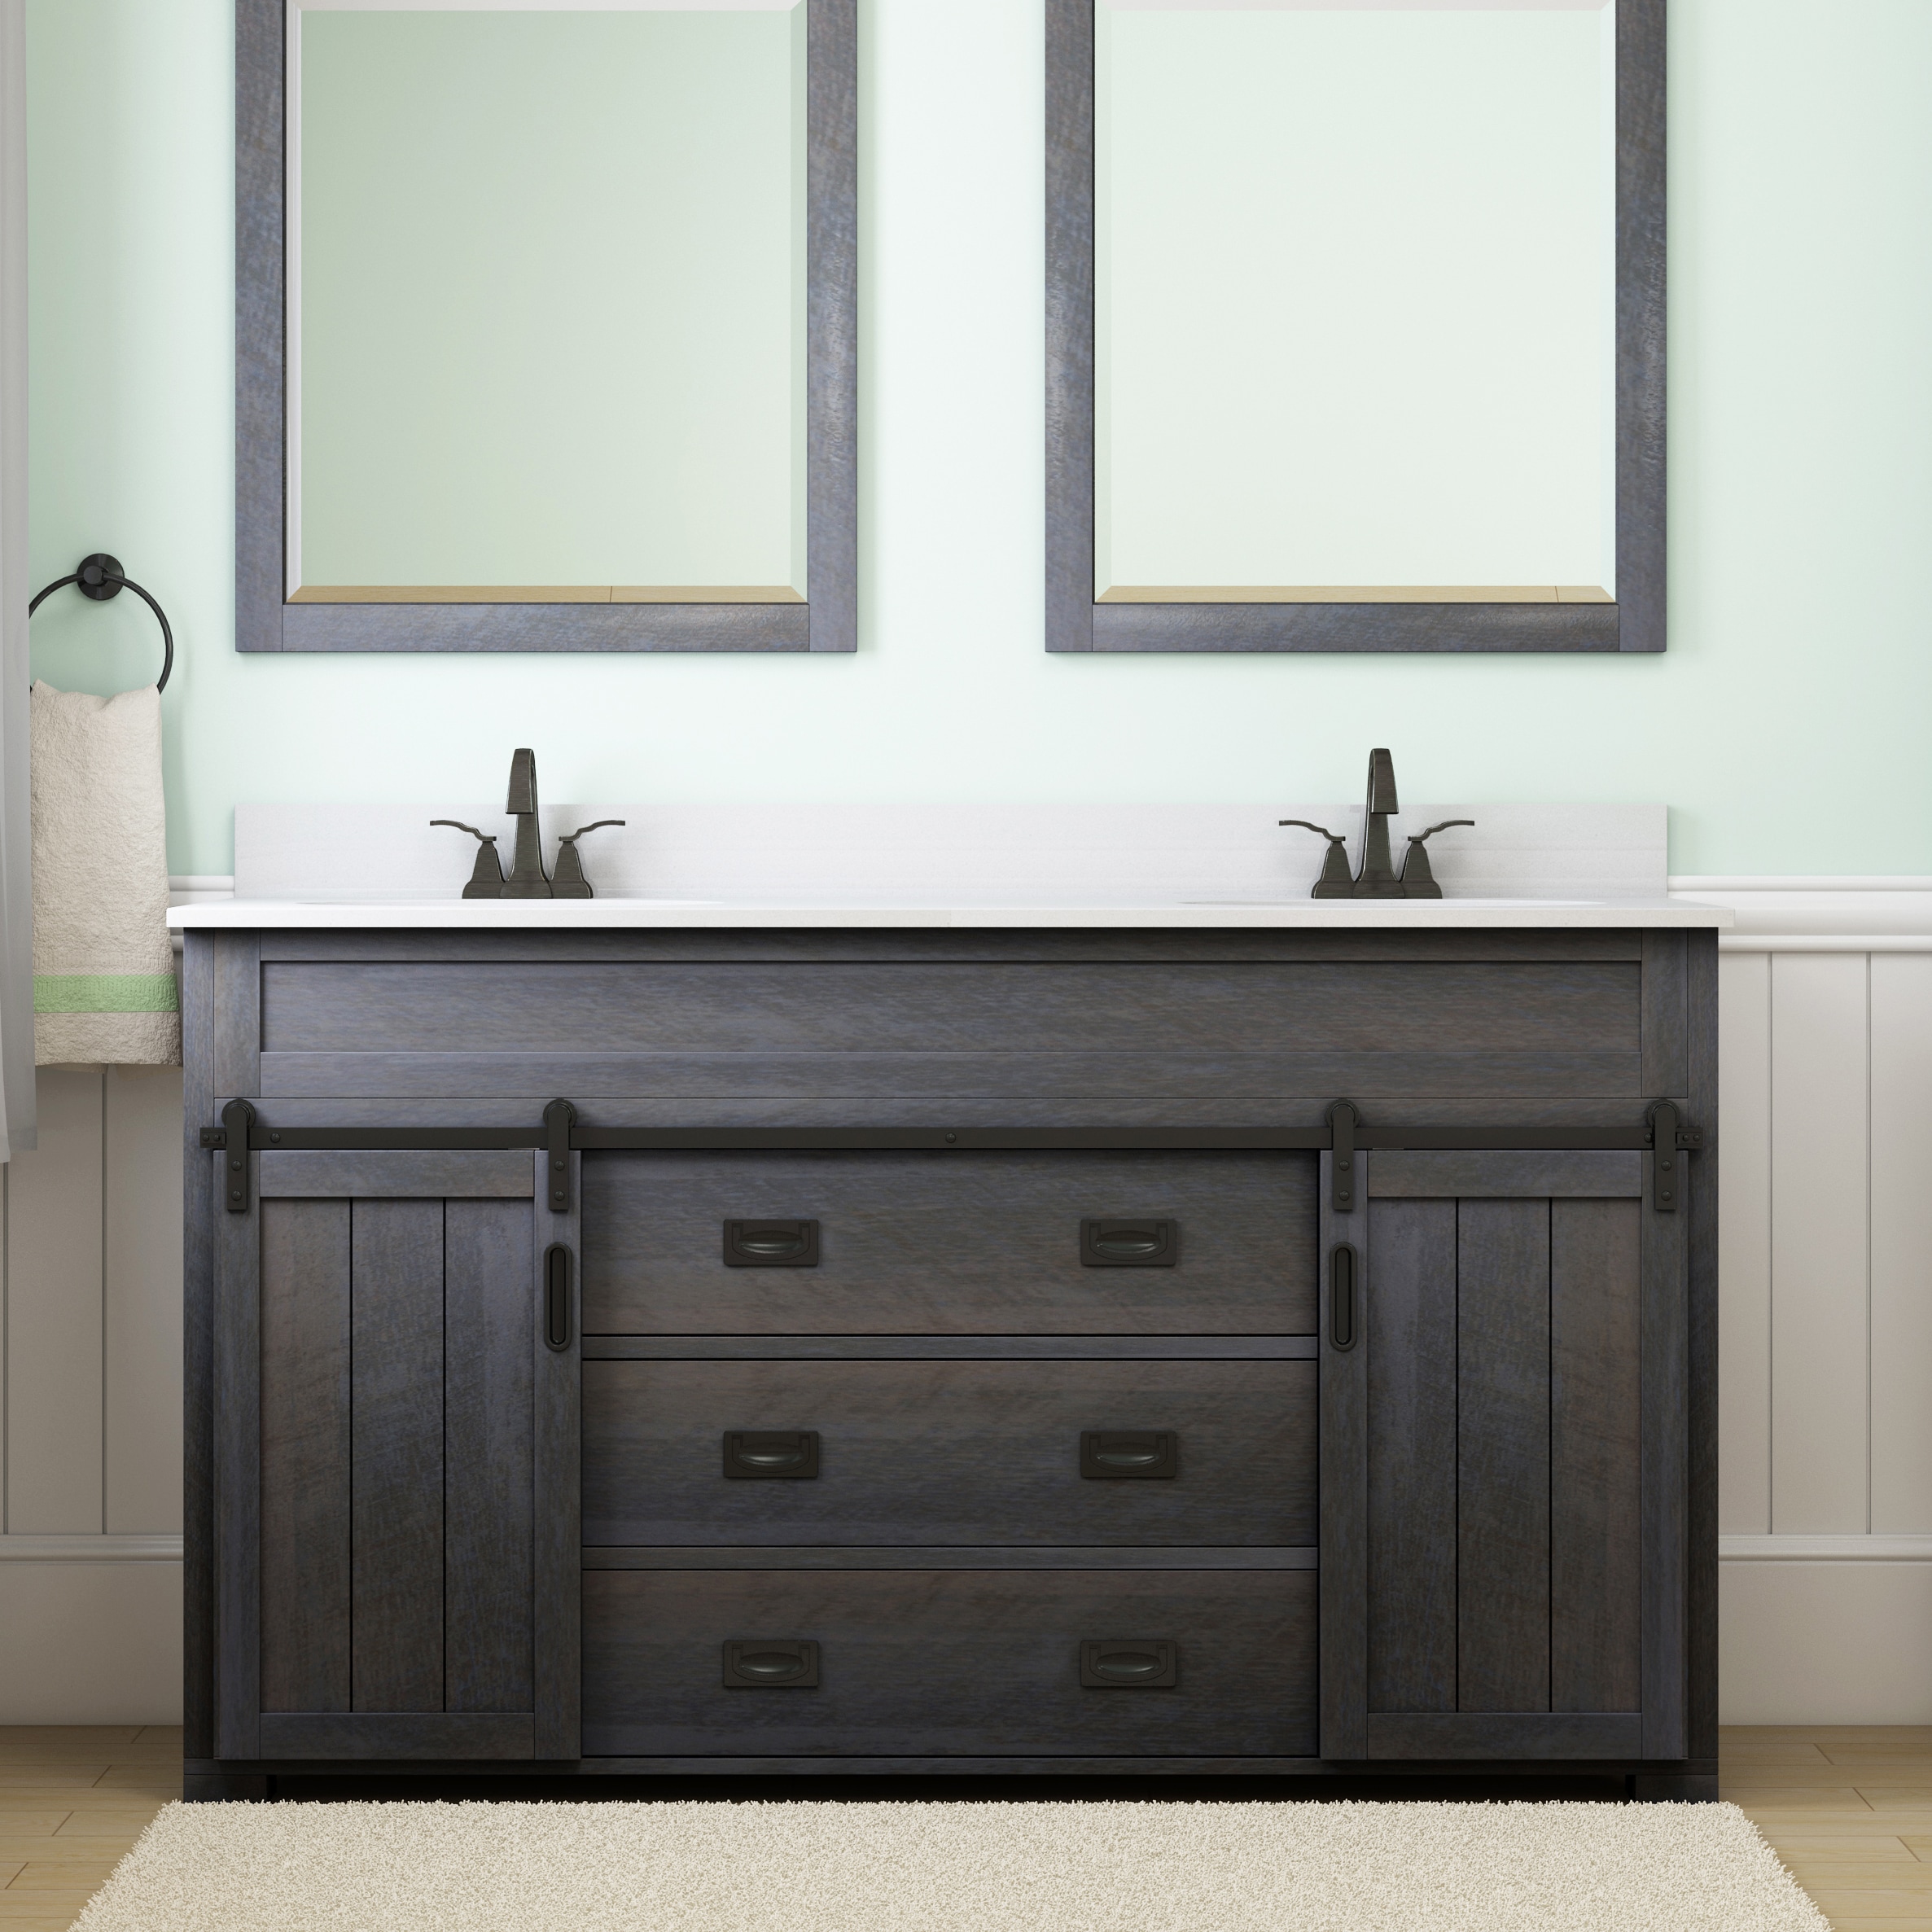 How To Choose A Rug For Your Double Vanity